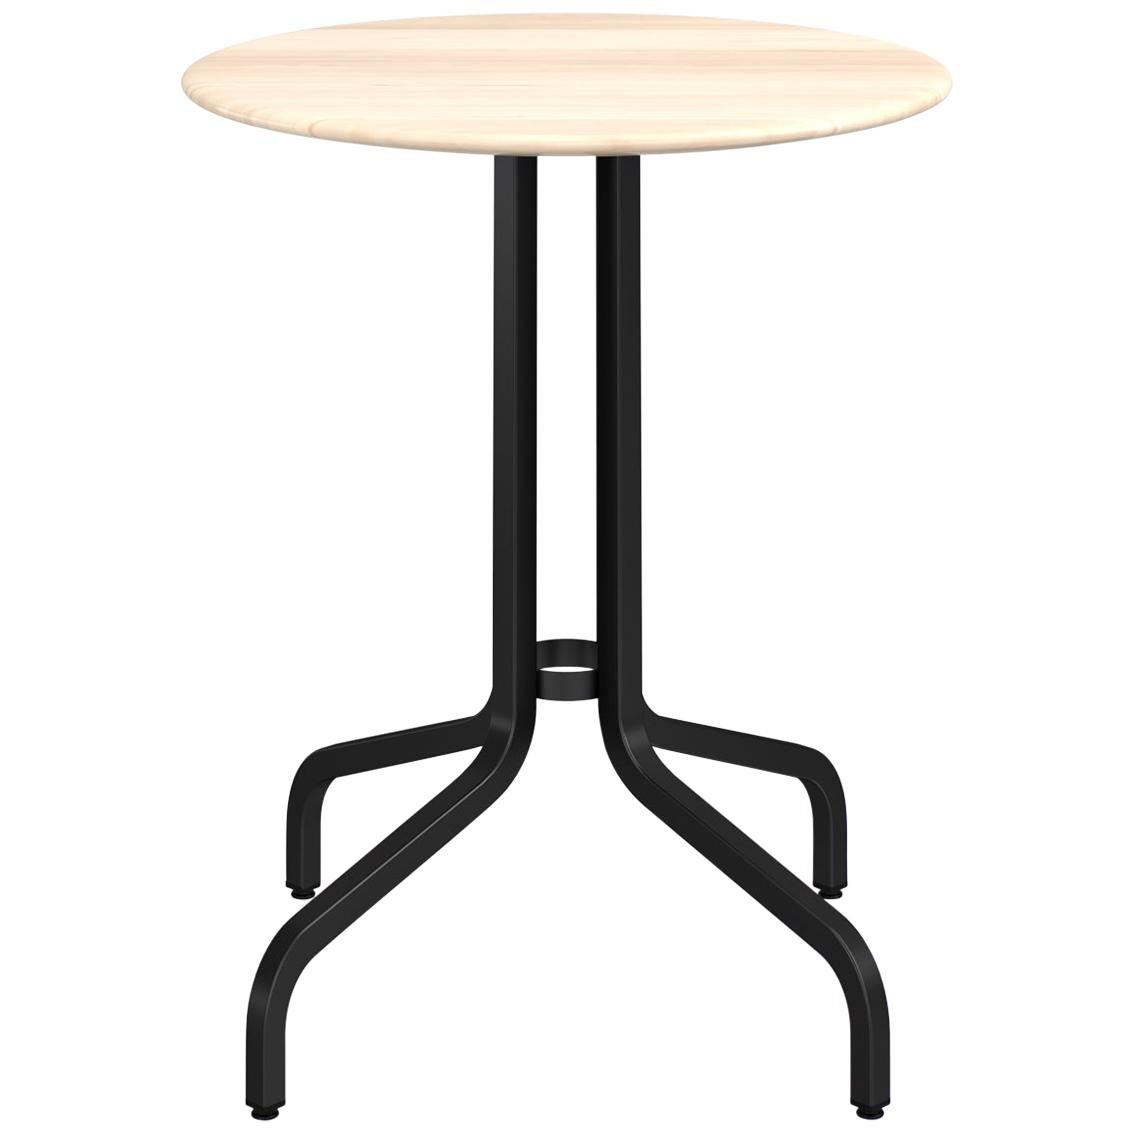 Emeco 1 Inch Round Cafe Table with Black Legs & Wood Top by Jasper Morrison For Sale